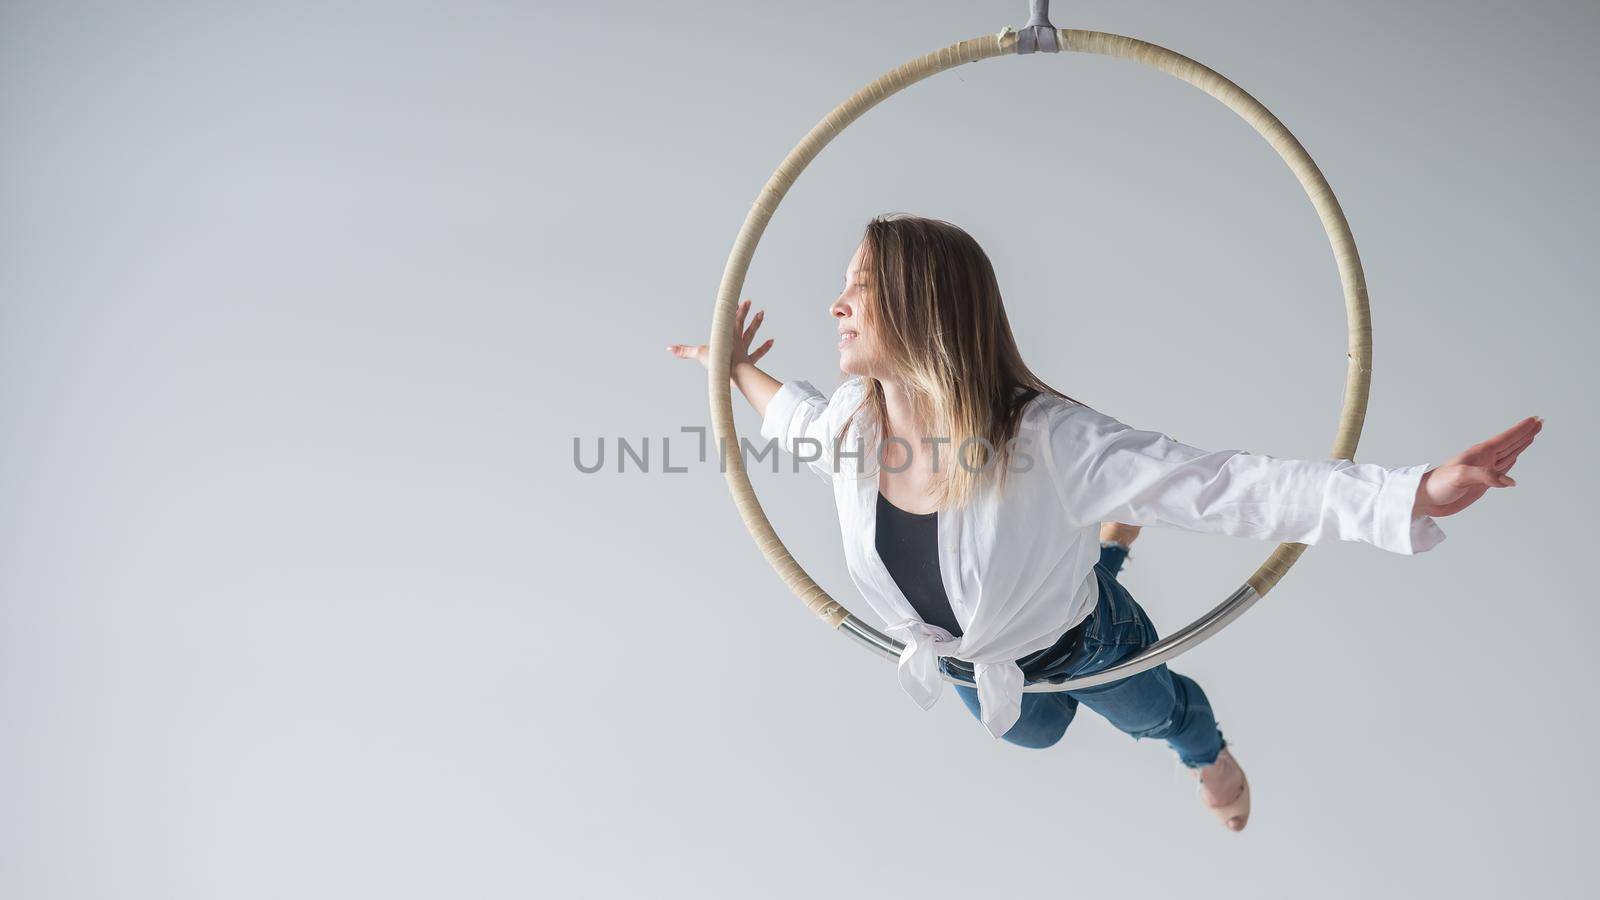 Caucasian woman in casual clothes and high heels shoes on air hoop. by mrwed54